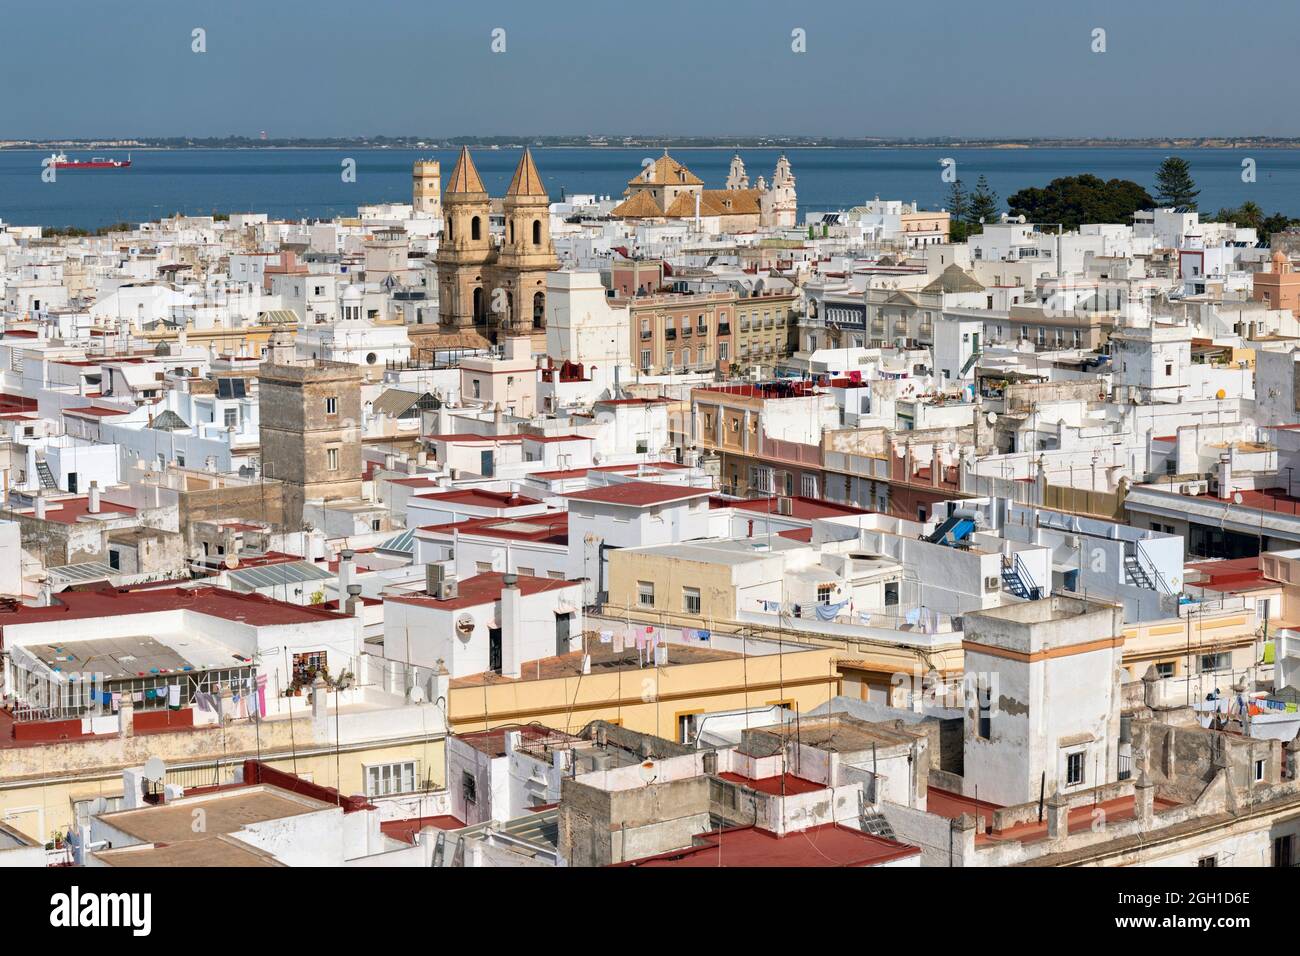 View of the old town from the Torre Tavira, Cadiz, Cadiz Province, Costa de la Luz, Andalusia, Spain. The church is that of San Antonio. Stock Photo